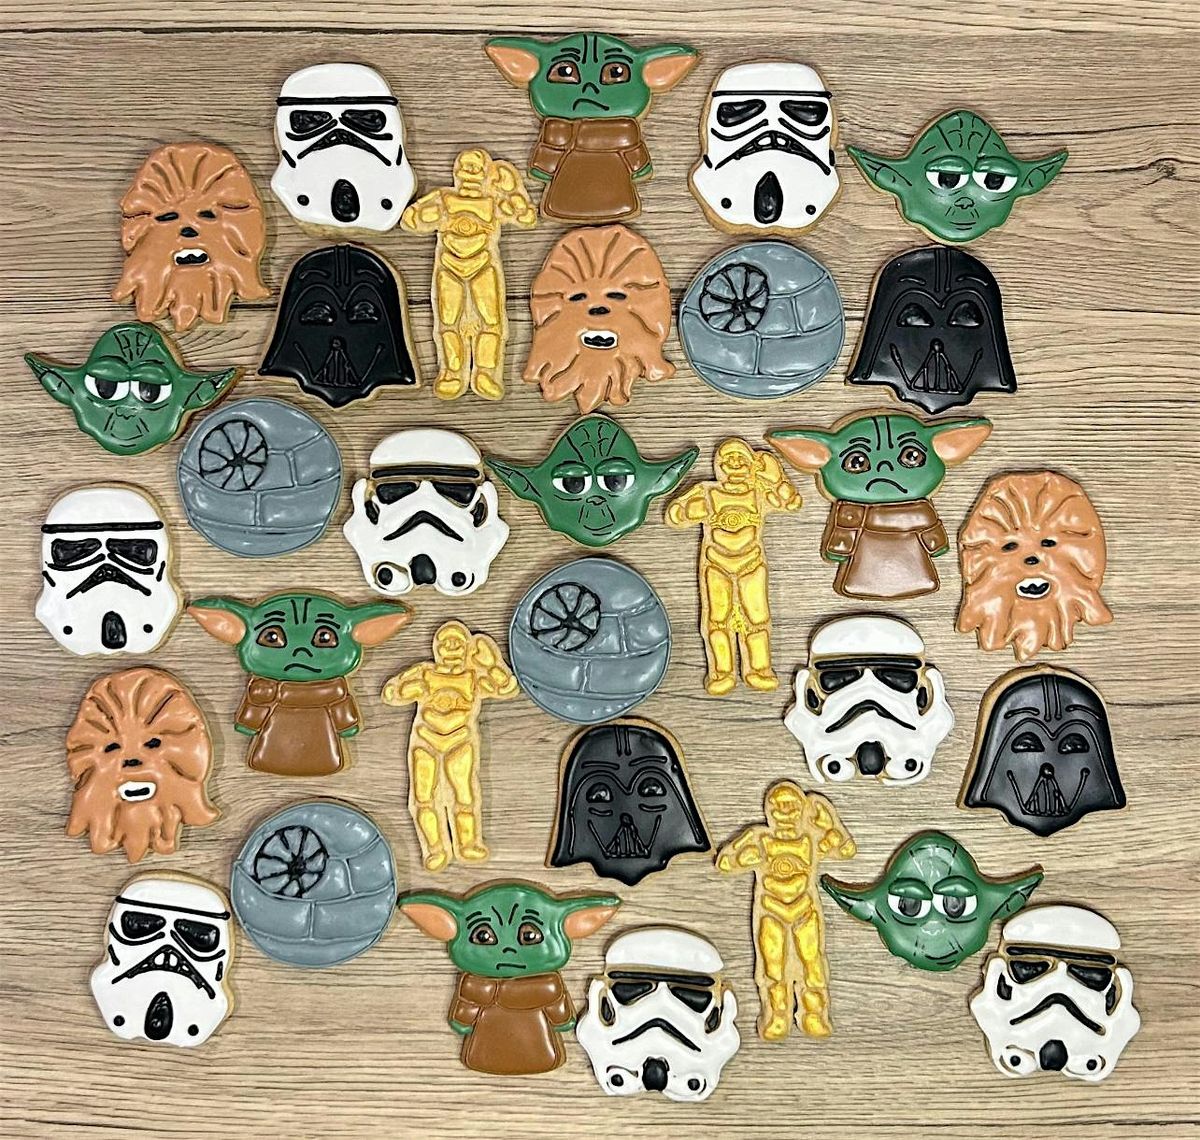 Star Wars Cookie Decorating Class (Ages 5+)